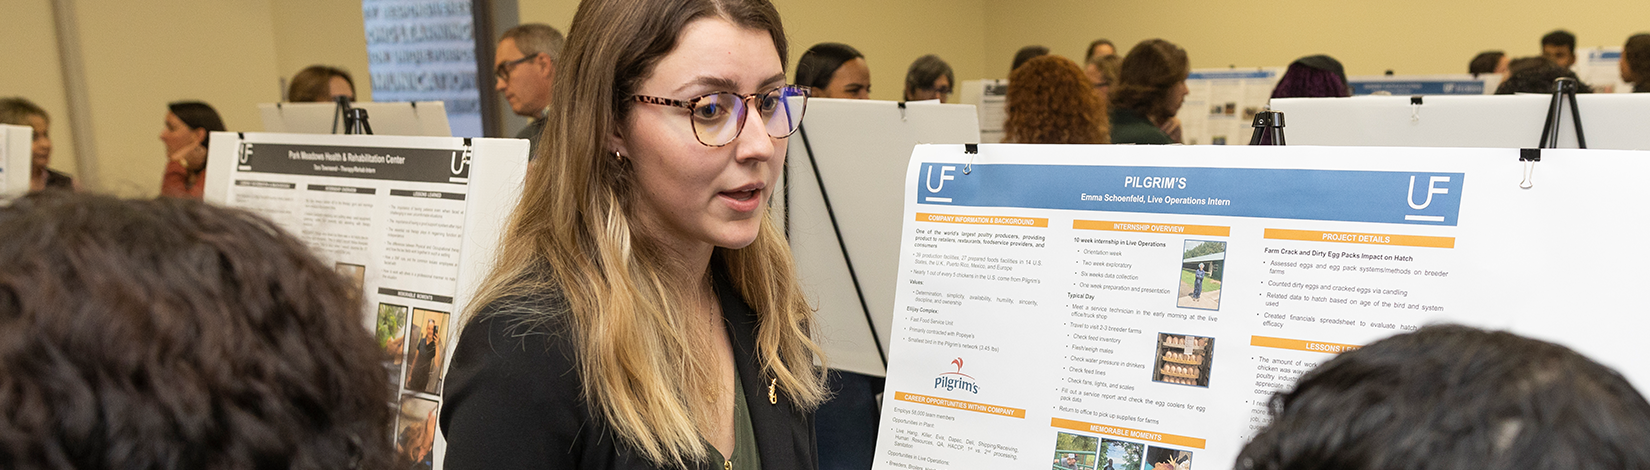 Student speaks to peers while standing in front of her research poster.